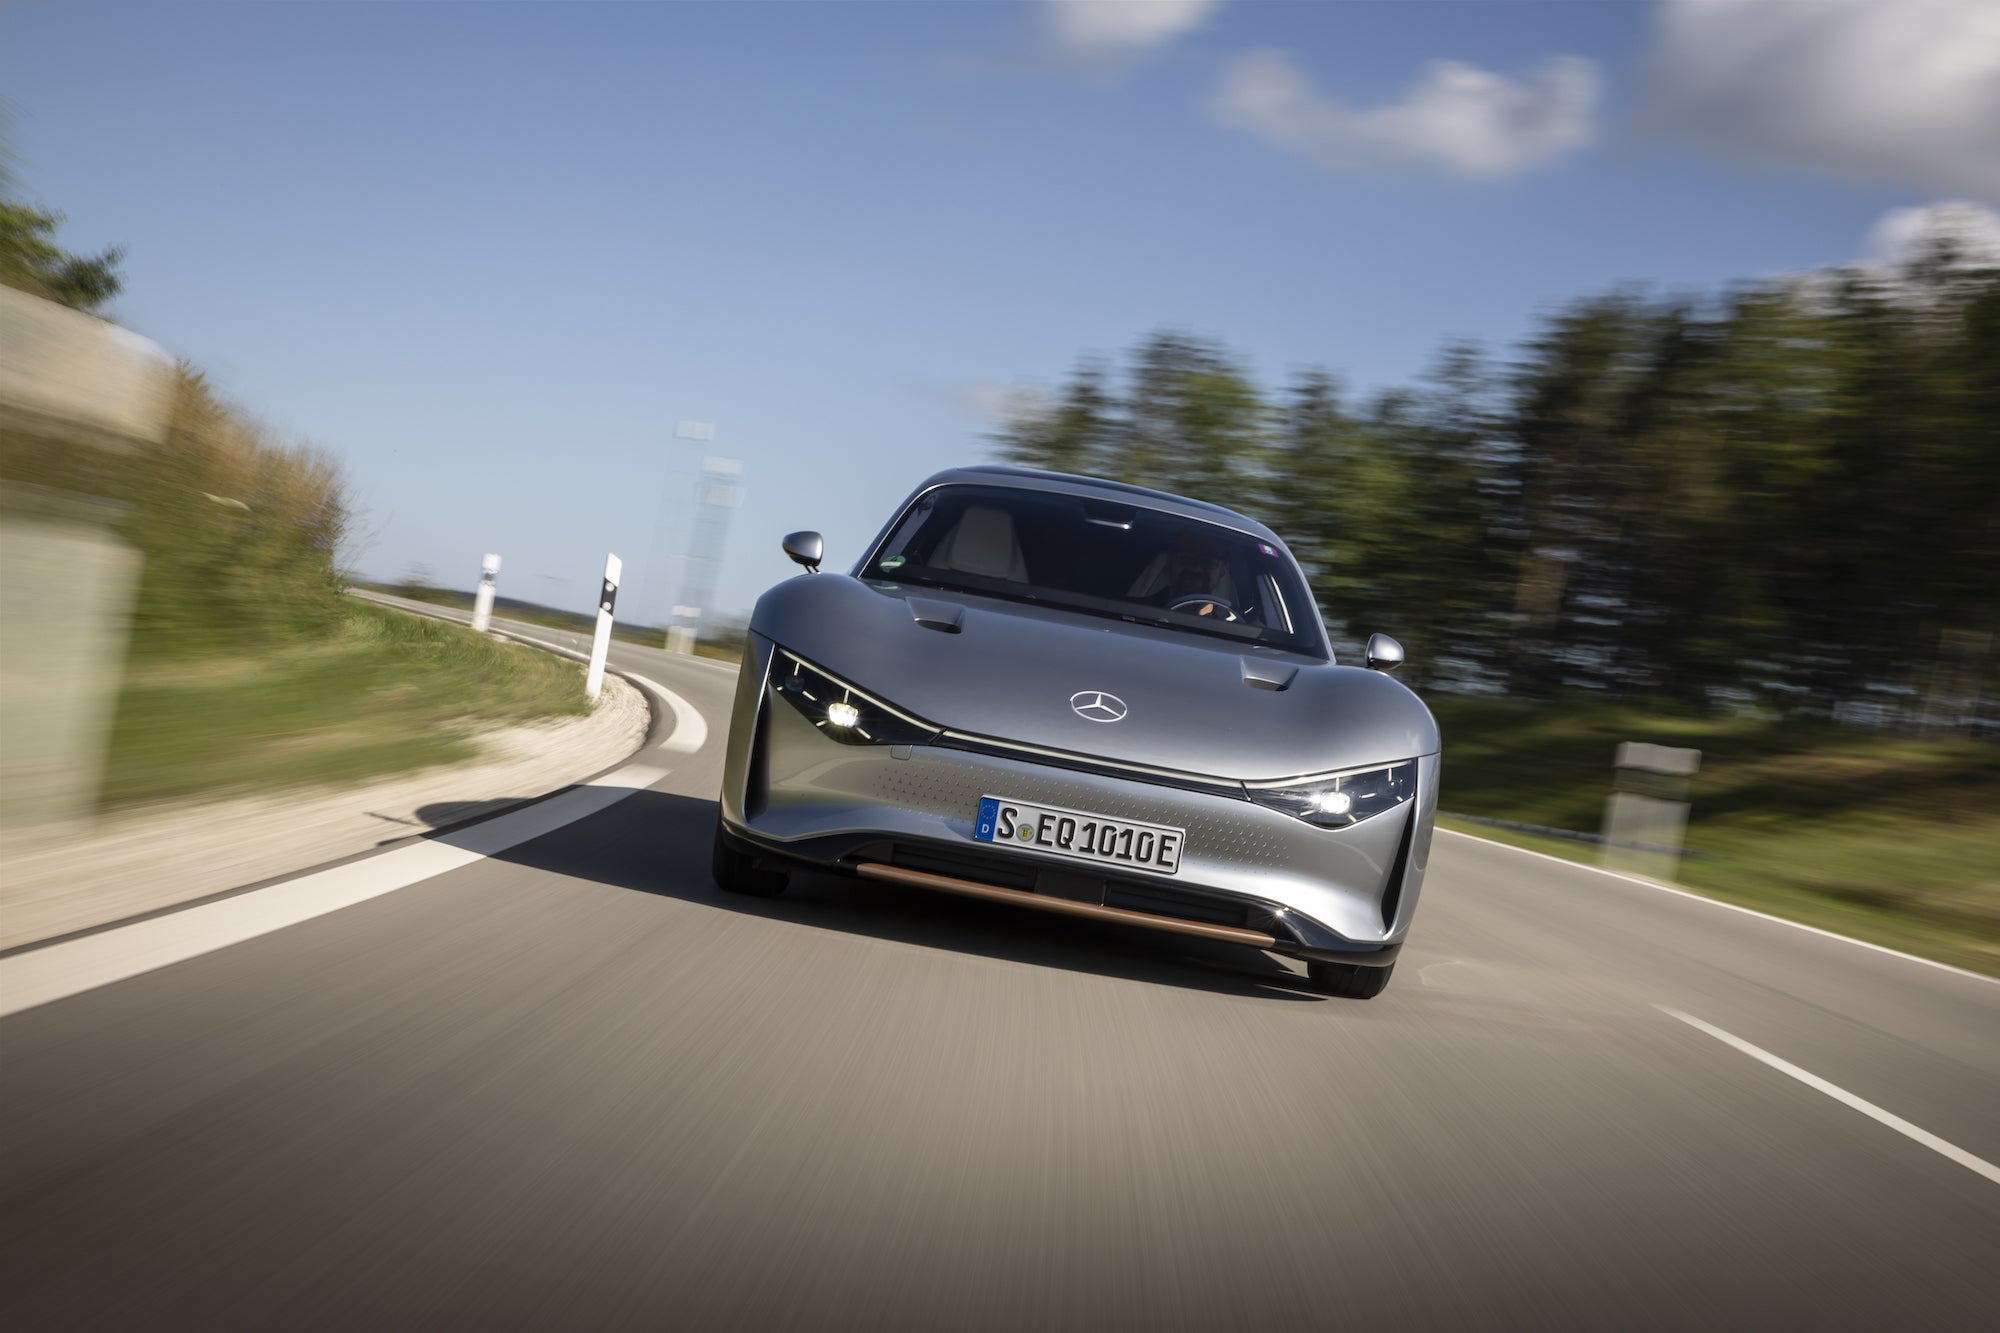 This Mercedes EV is a moonshot machine that can travel 621 miles on a single charge